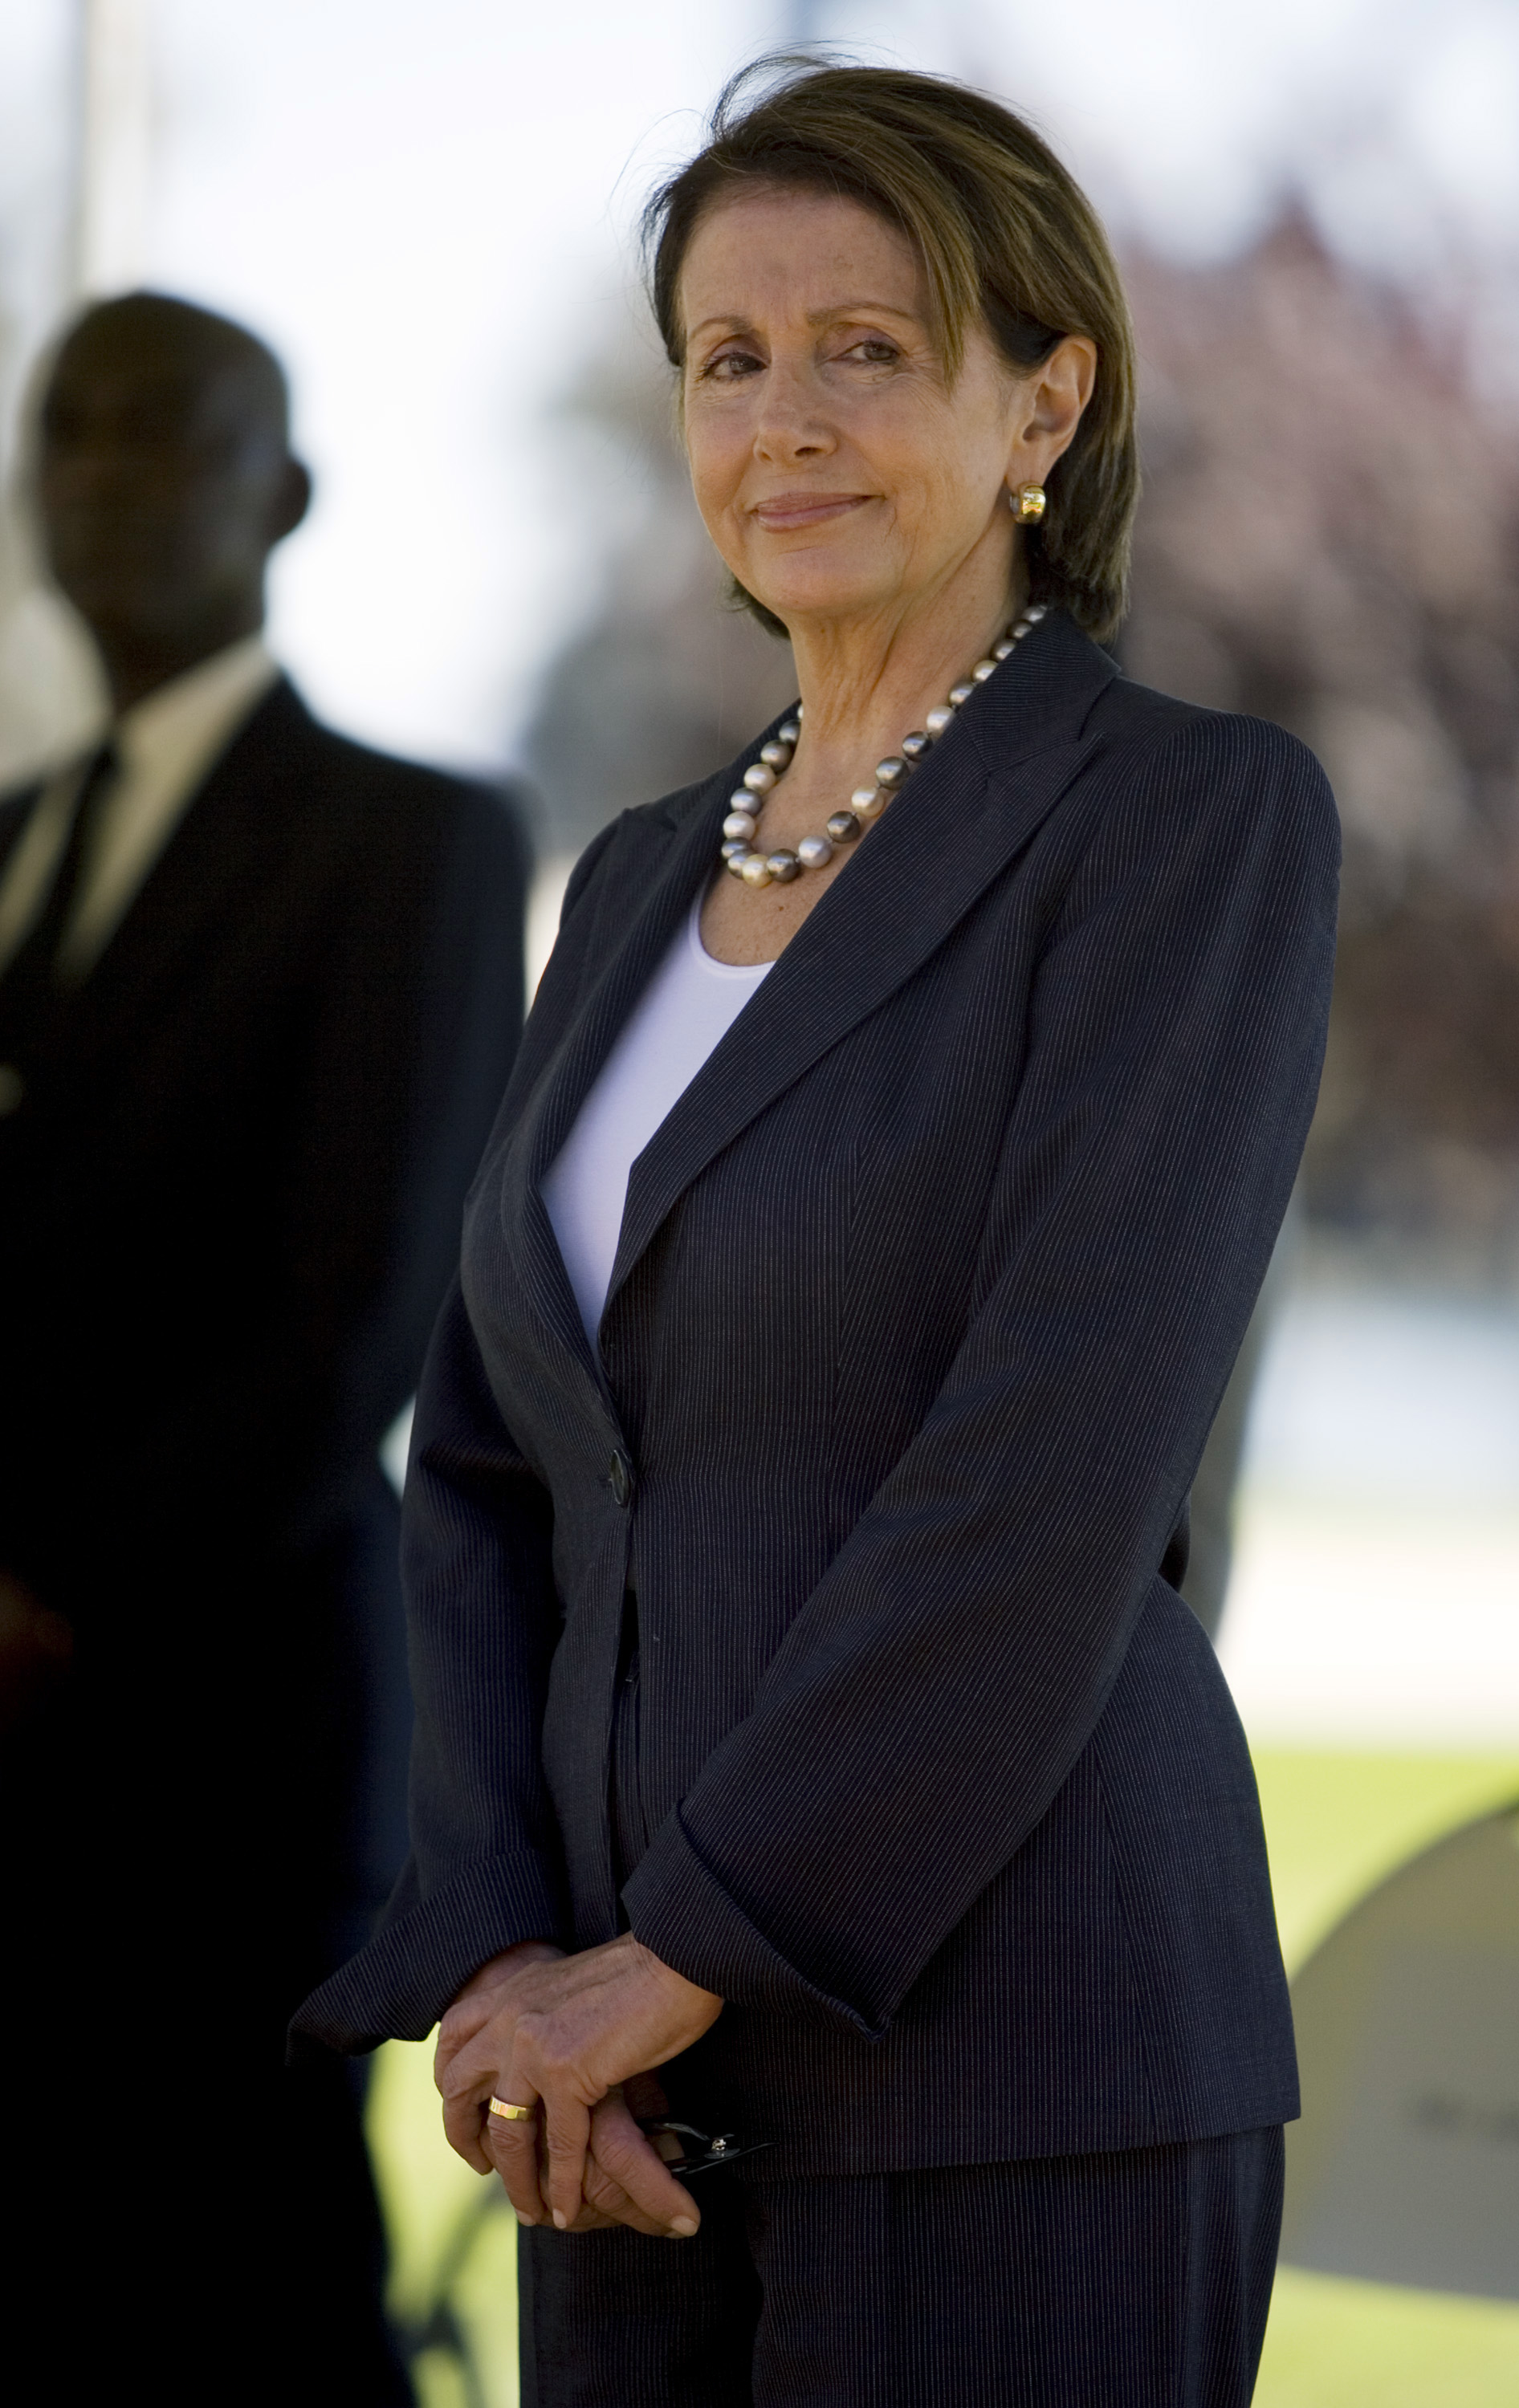 Nancy Pelosi listens during a ceremony held by the U.S. Coast Guard on their Yerba Buena island base, on August 16, 2007, in San Francisco, California. | Source: Getty Images